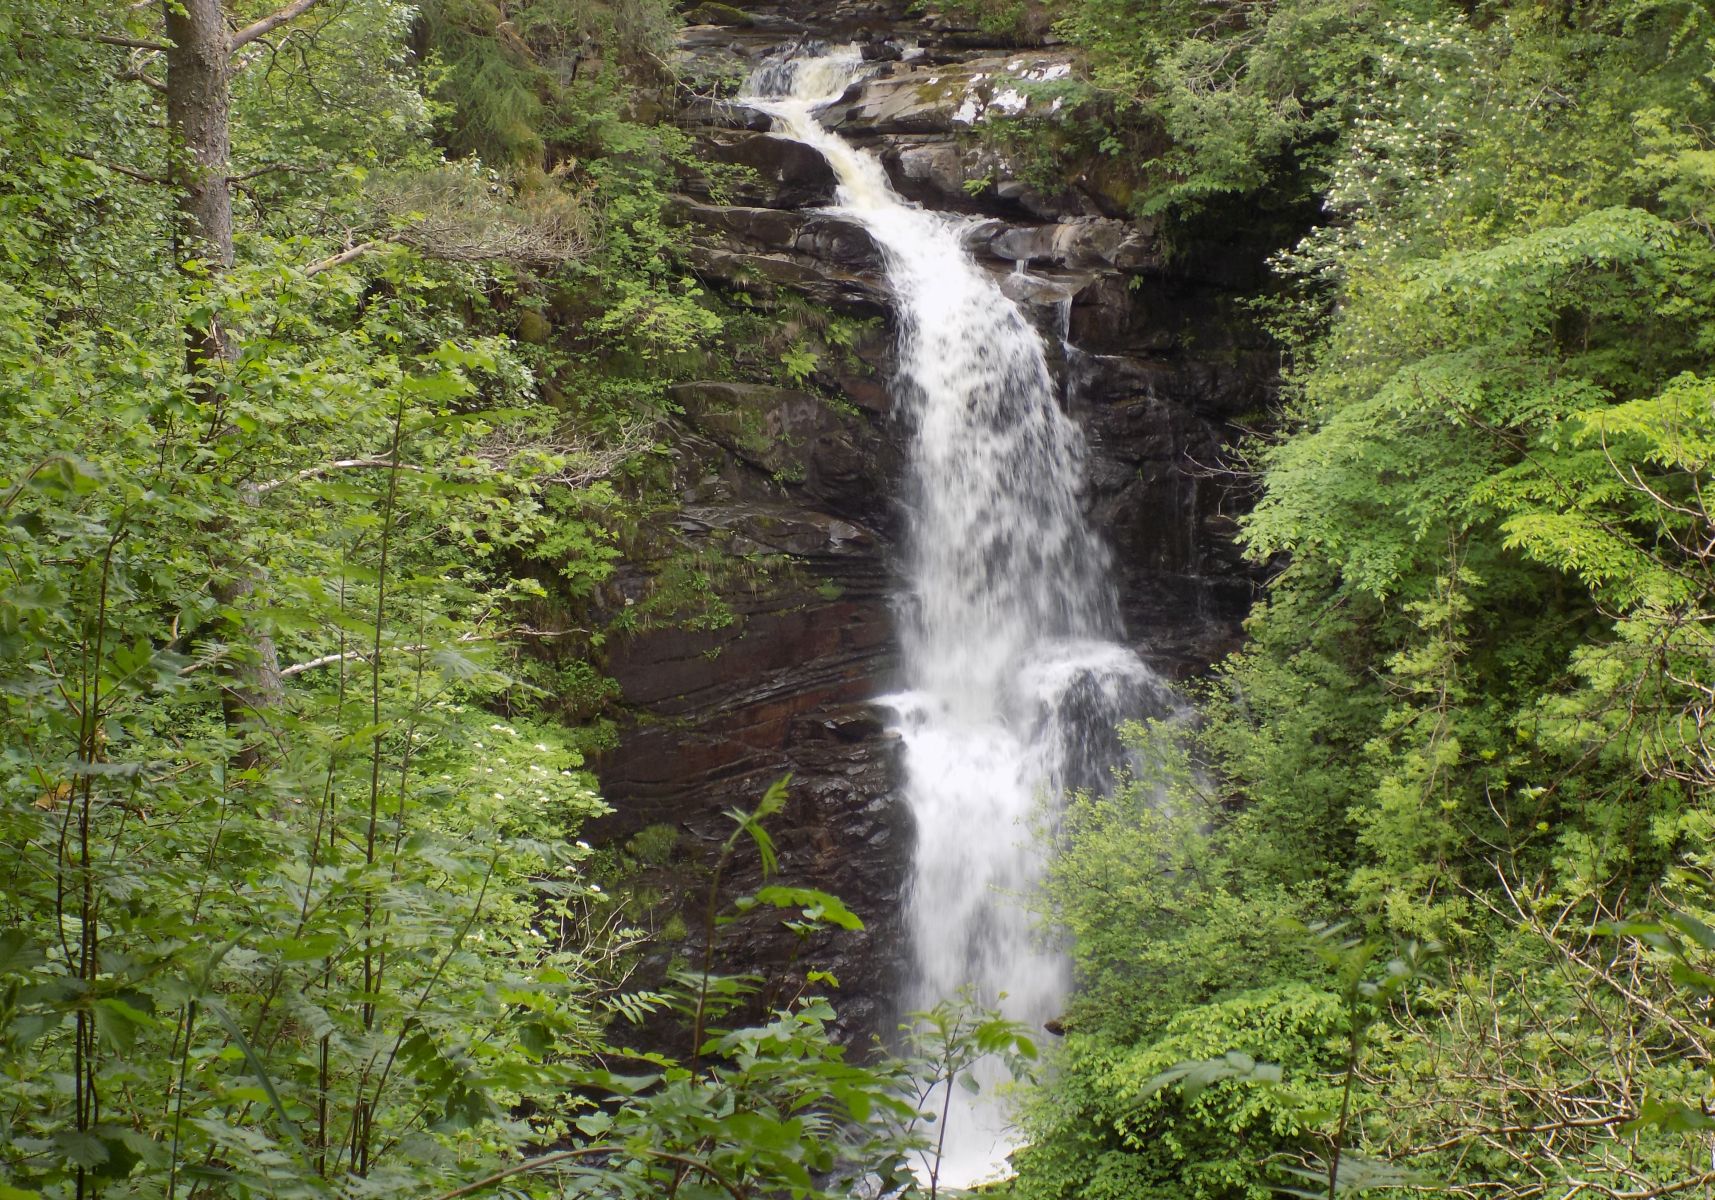 The Falls of Moness in the Birks of Aberfeldy